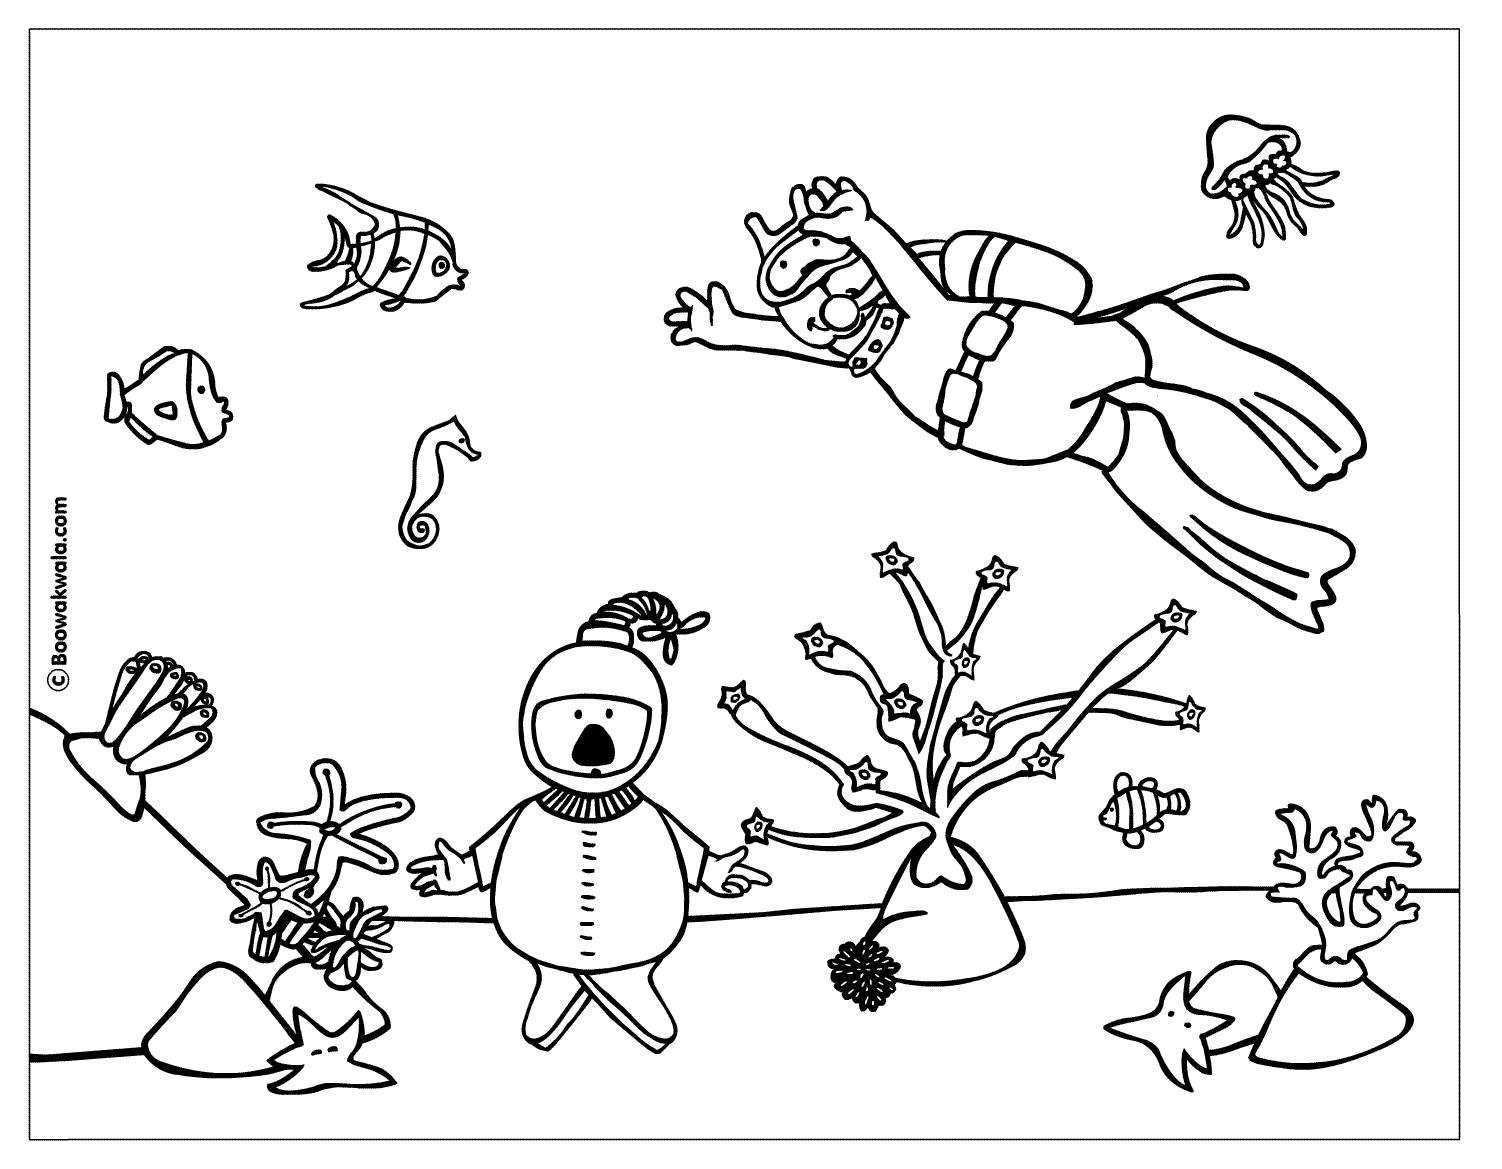 Under the sea coloring pages to download and print for free